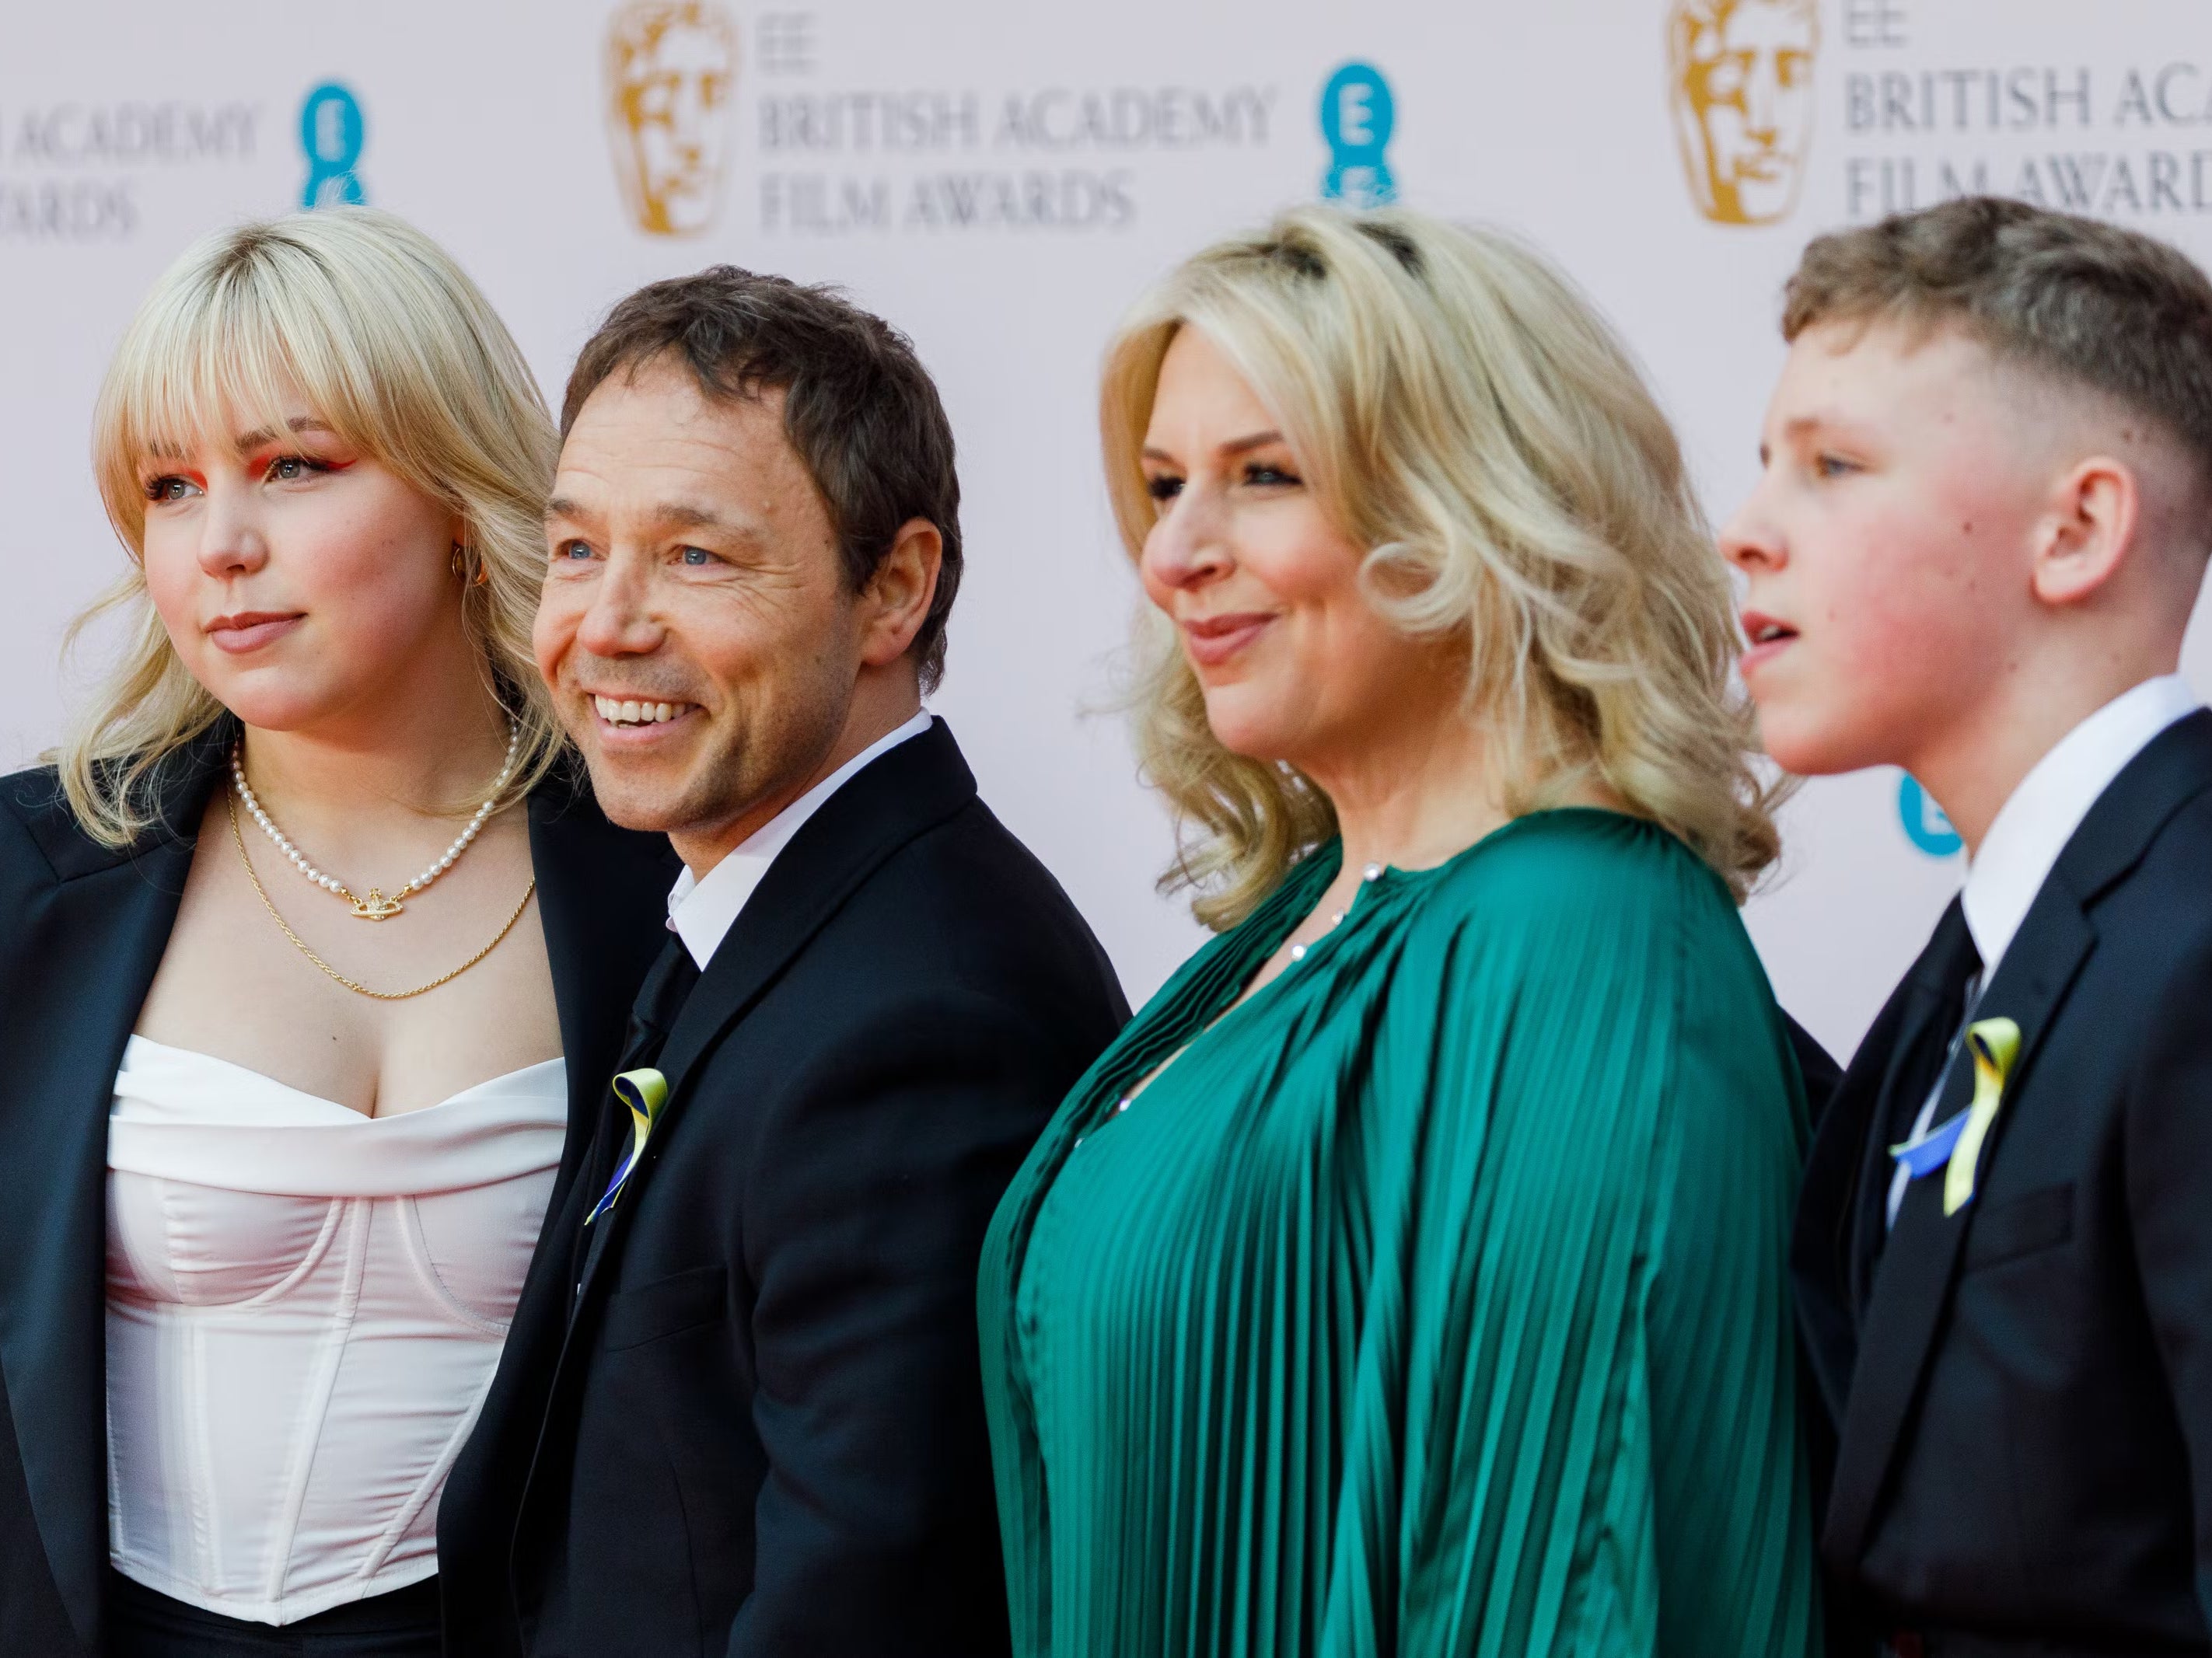 Graham with his children and his wife, actor Hannah Walters